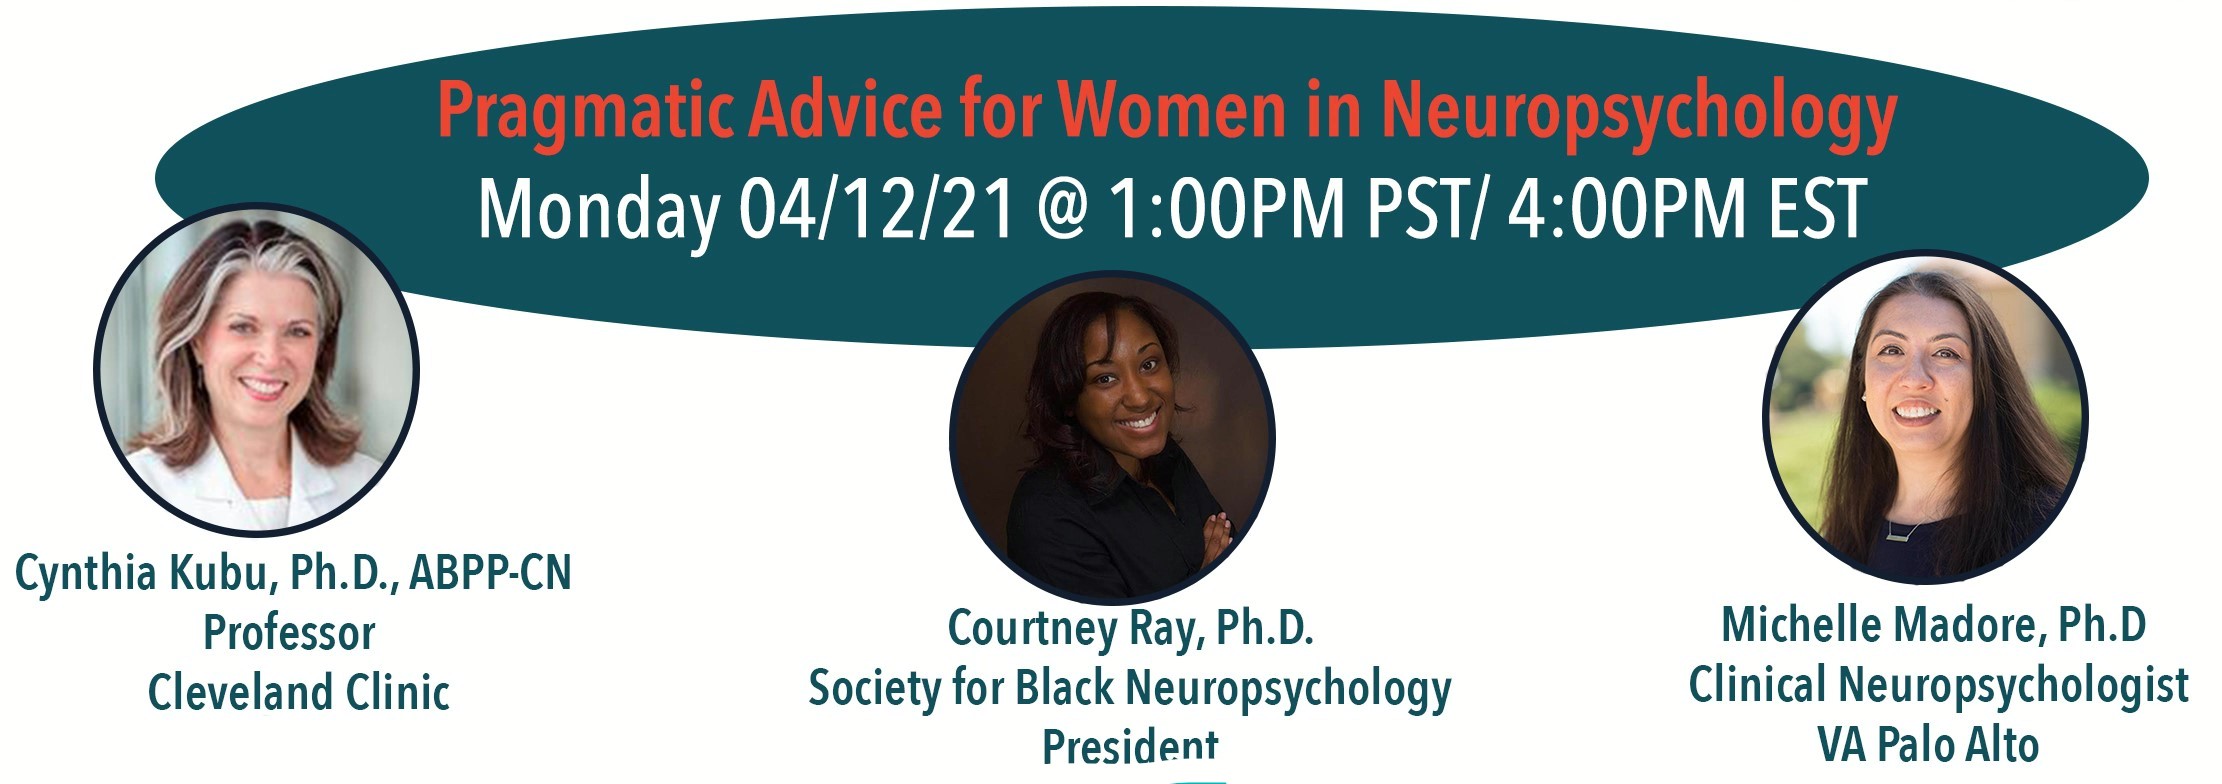 Pragmatic advice for women in neuropsychology with Dr. Cynthia Kubu, Dr. Courtney Ray, and Dr. Michelle Madore